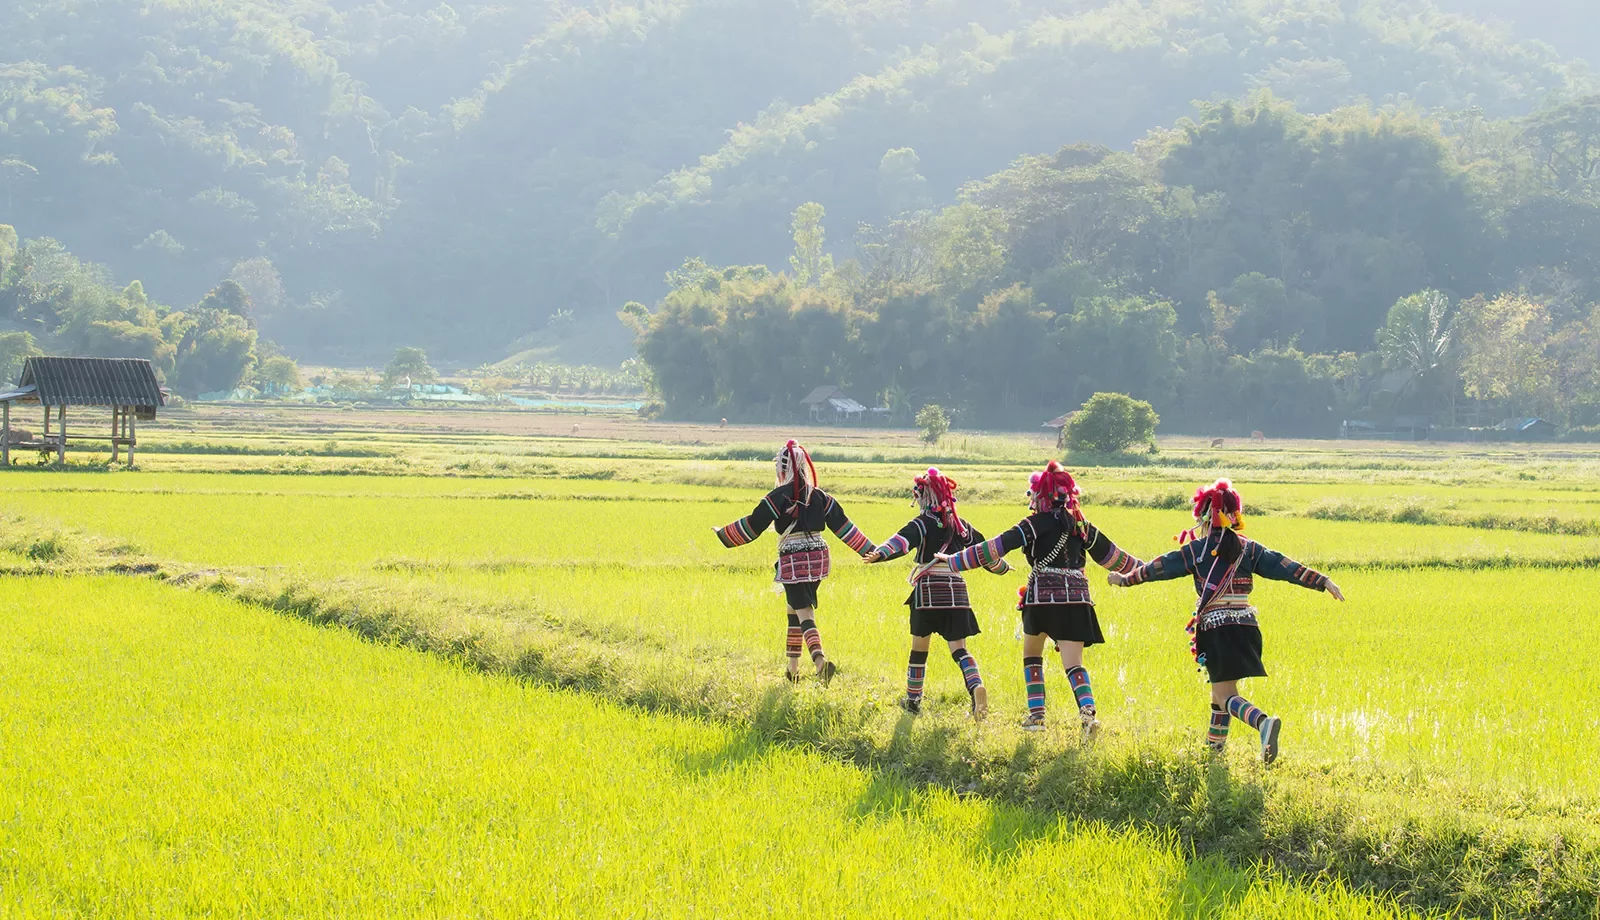 Thai people in traditional clothes running through a green field